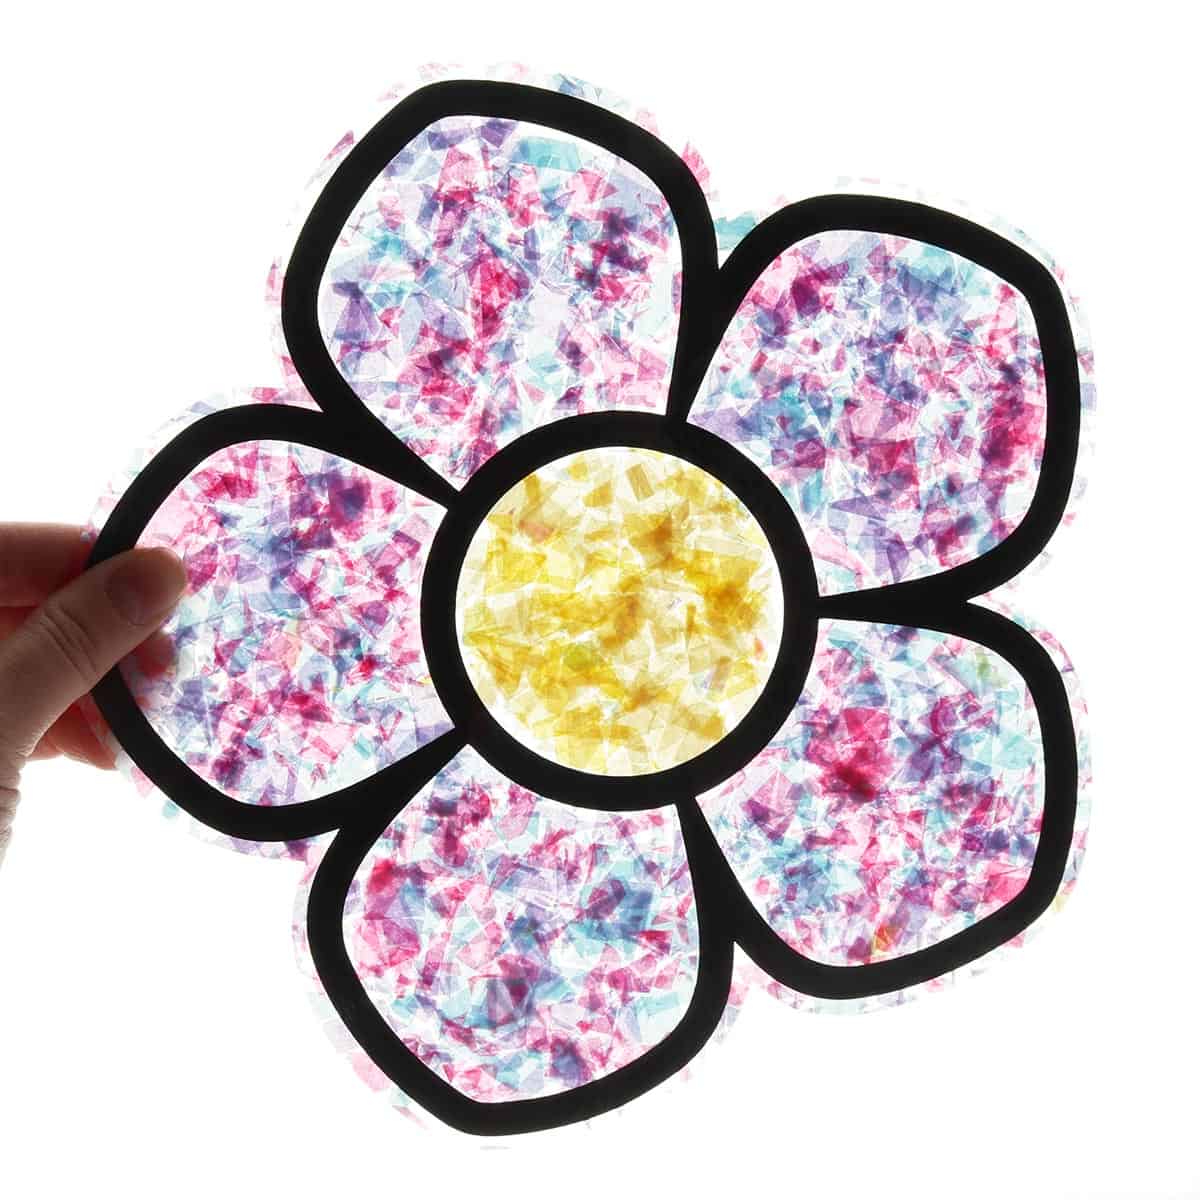 DIY confetti stained glass art project